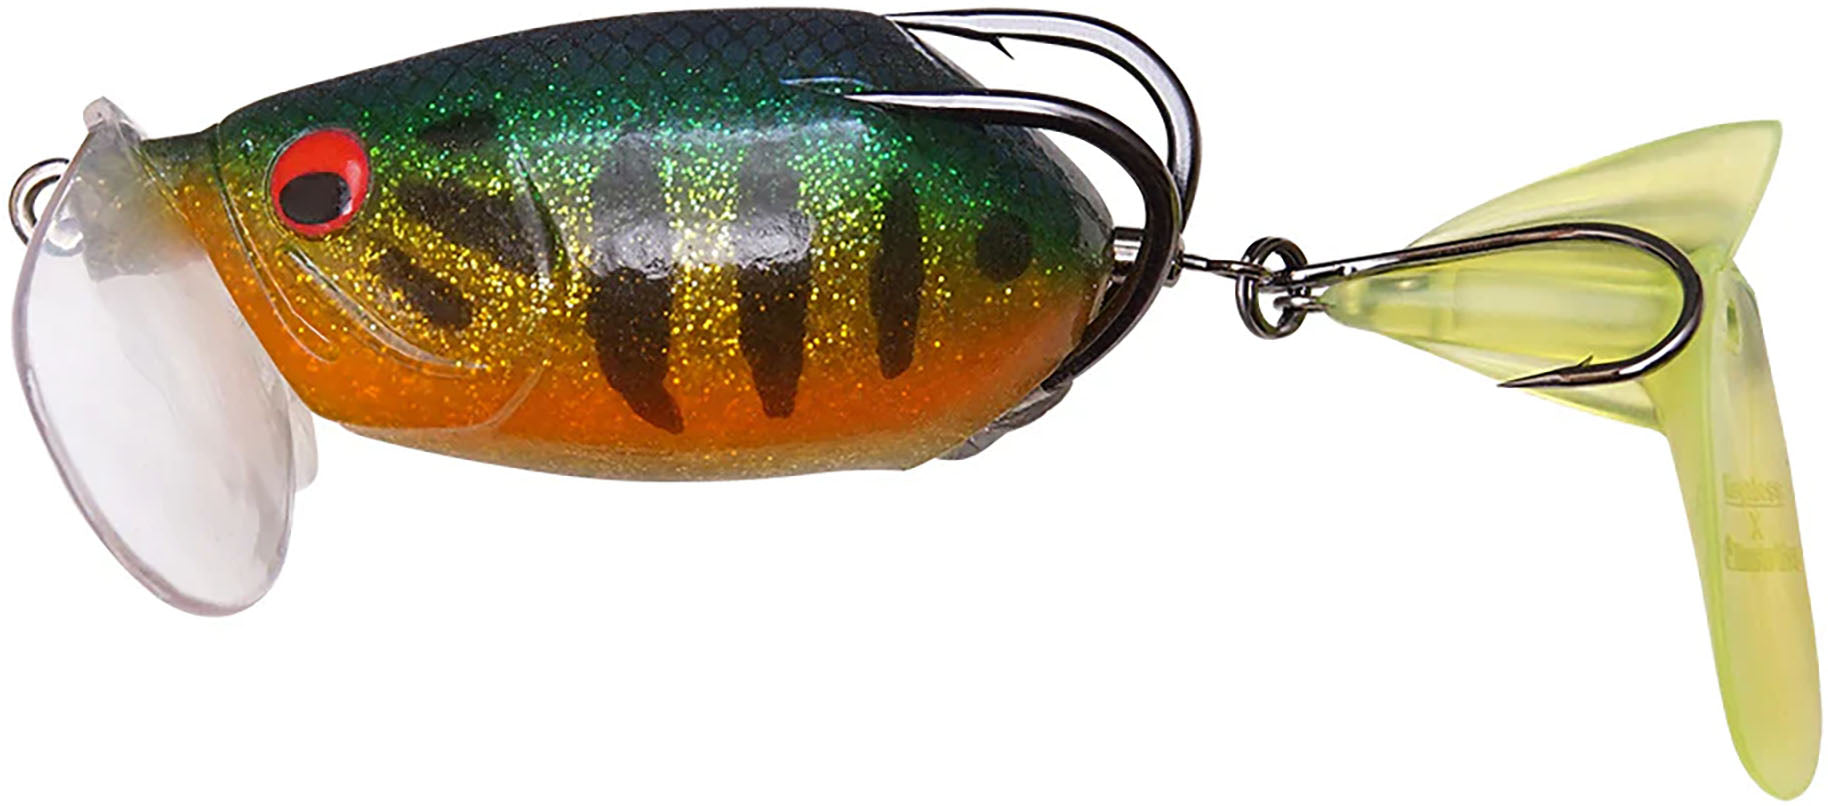 The famous Megabass Type X frog lure.